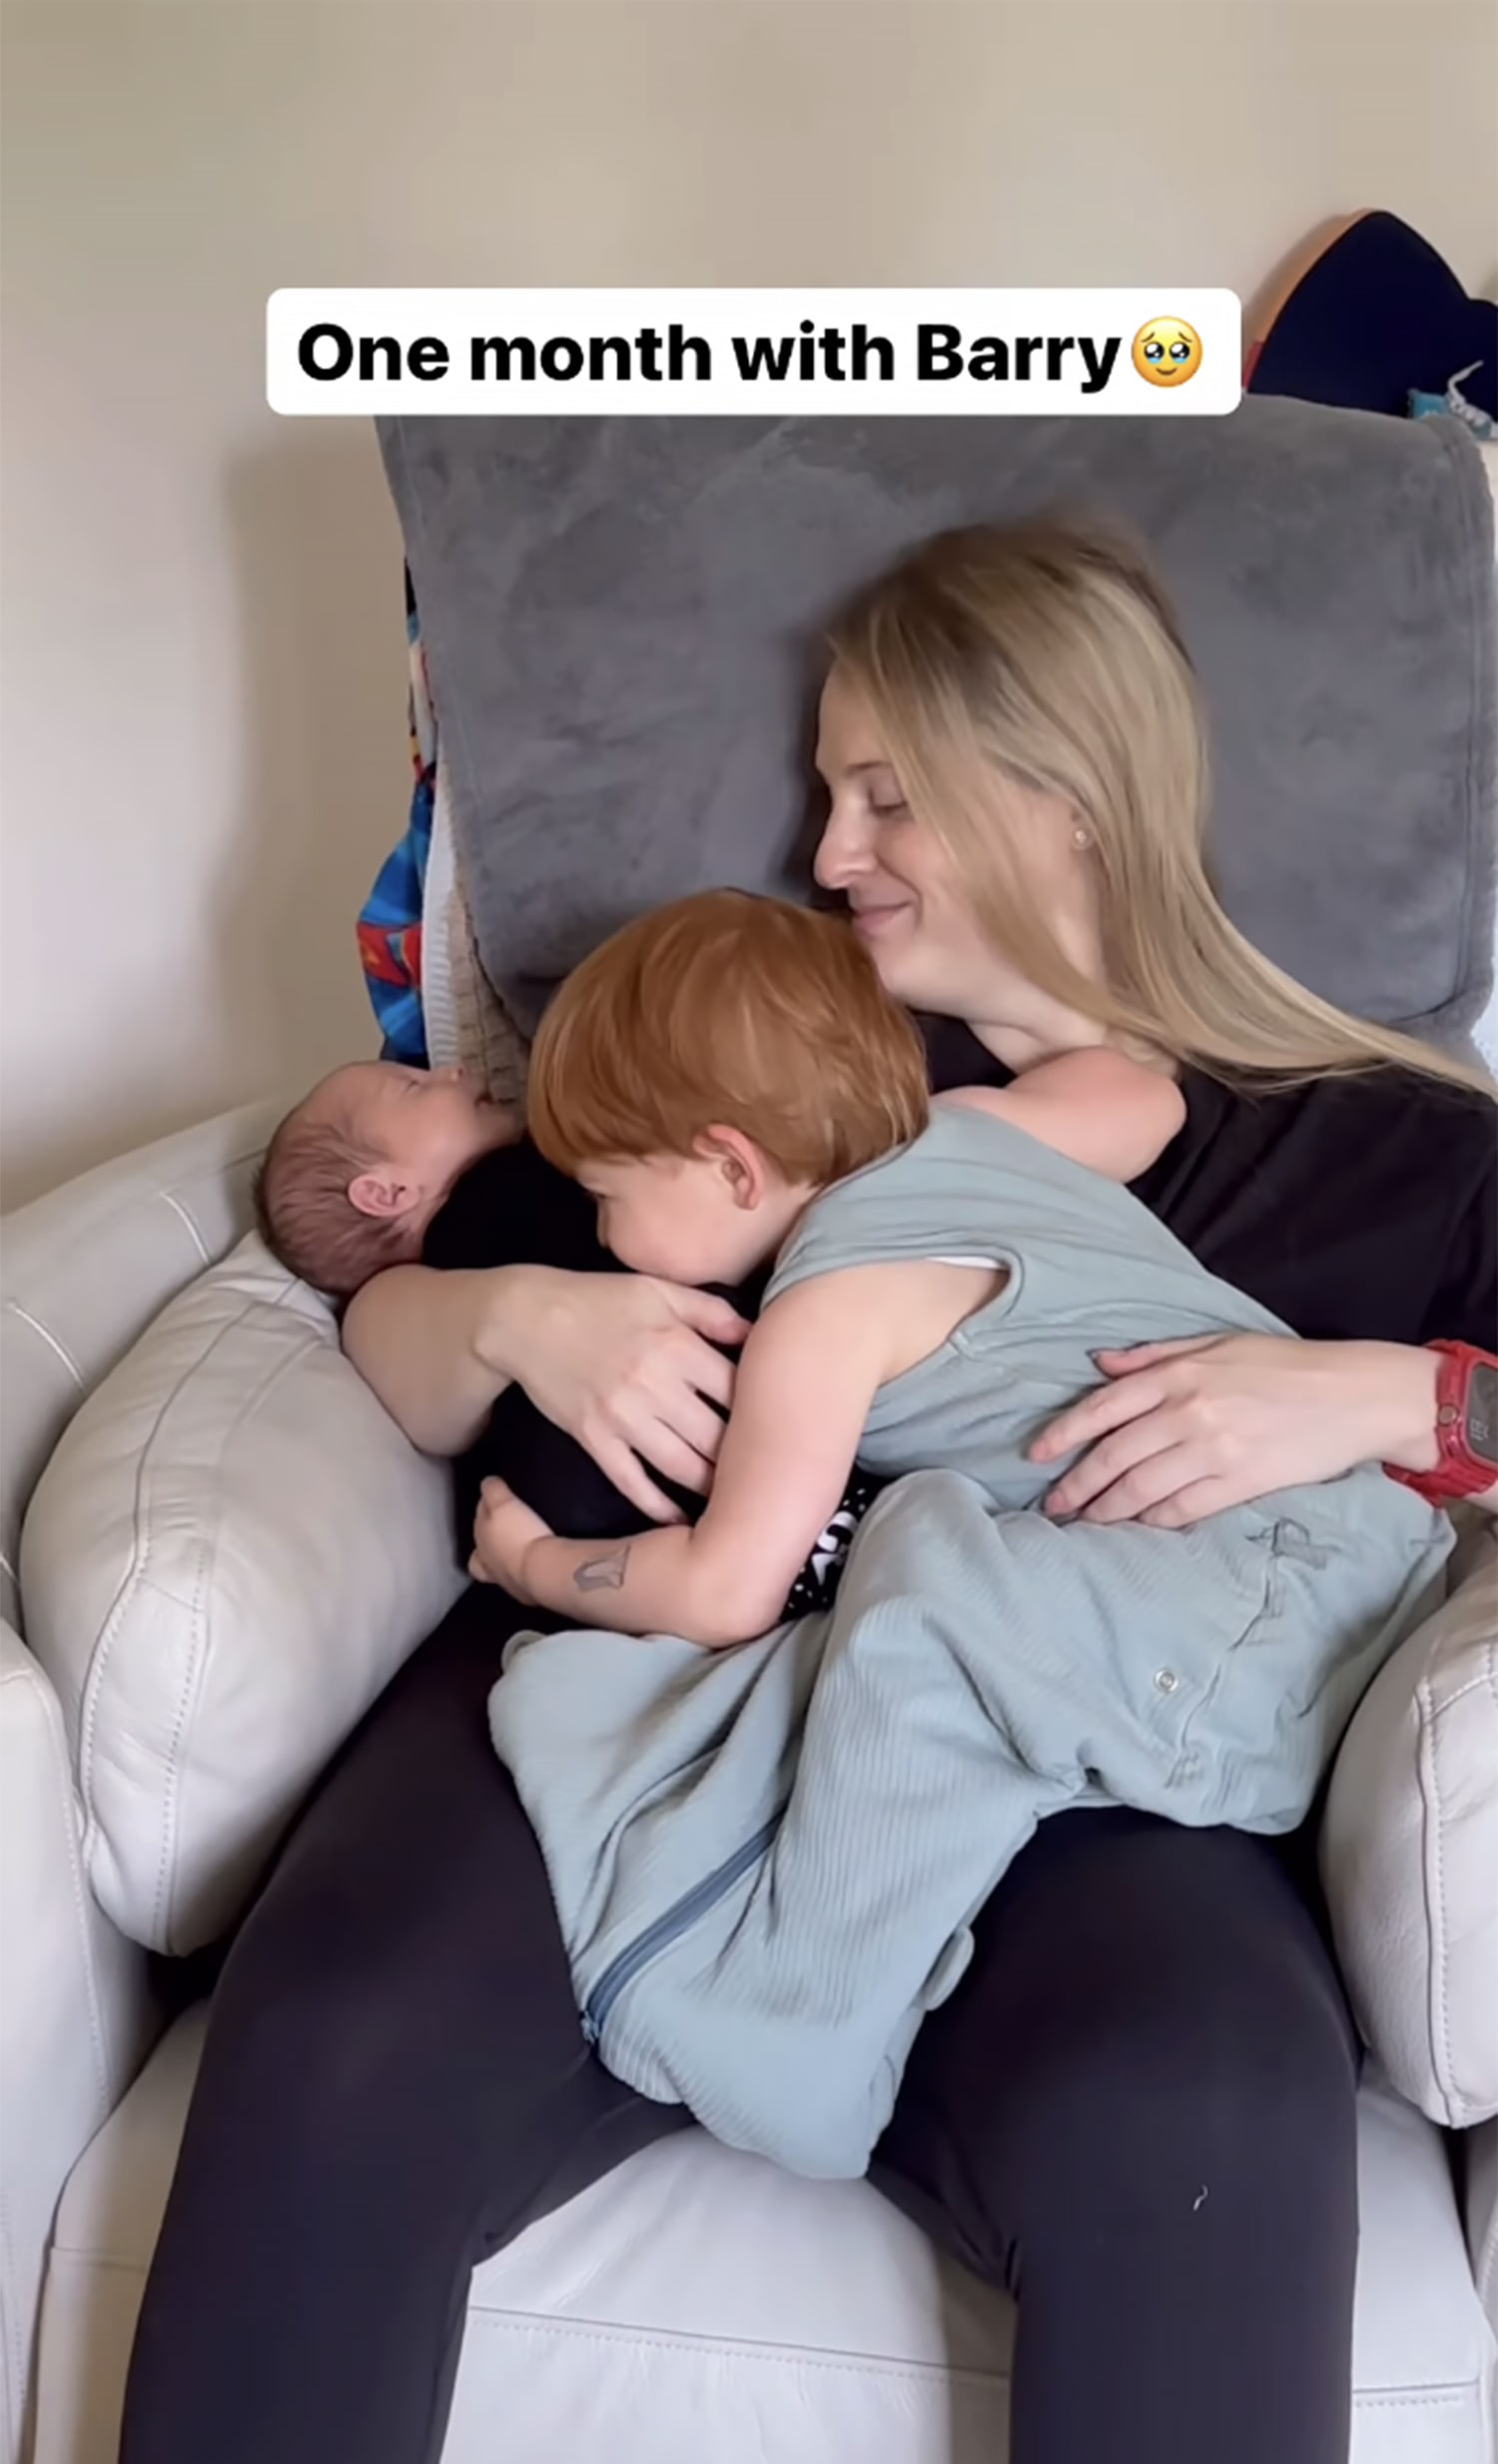 Watch Meghan Trainor's heartwarming video of 2-month-old son